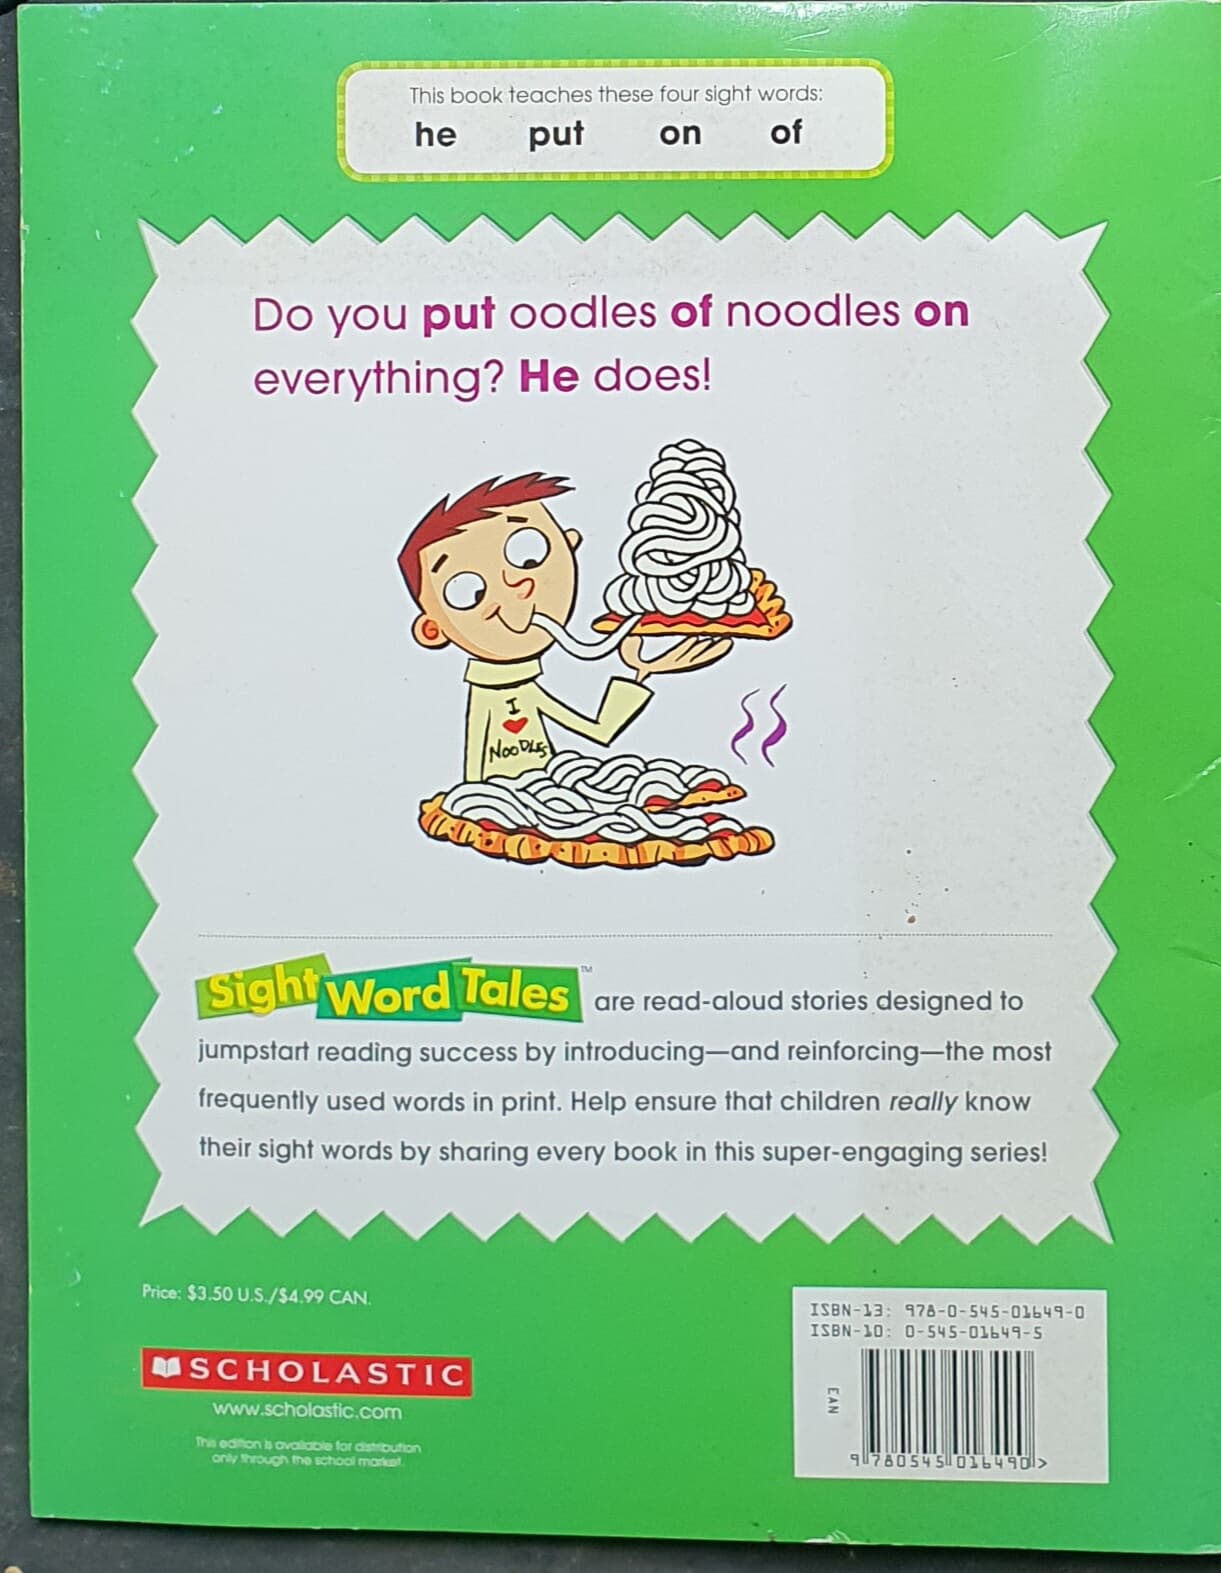 Oddles of Noodles (Sight Word Tales) Paperback